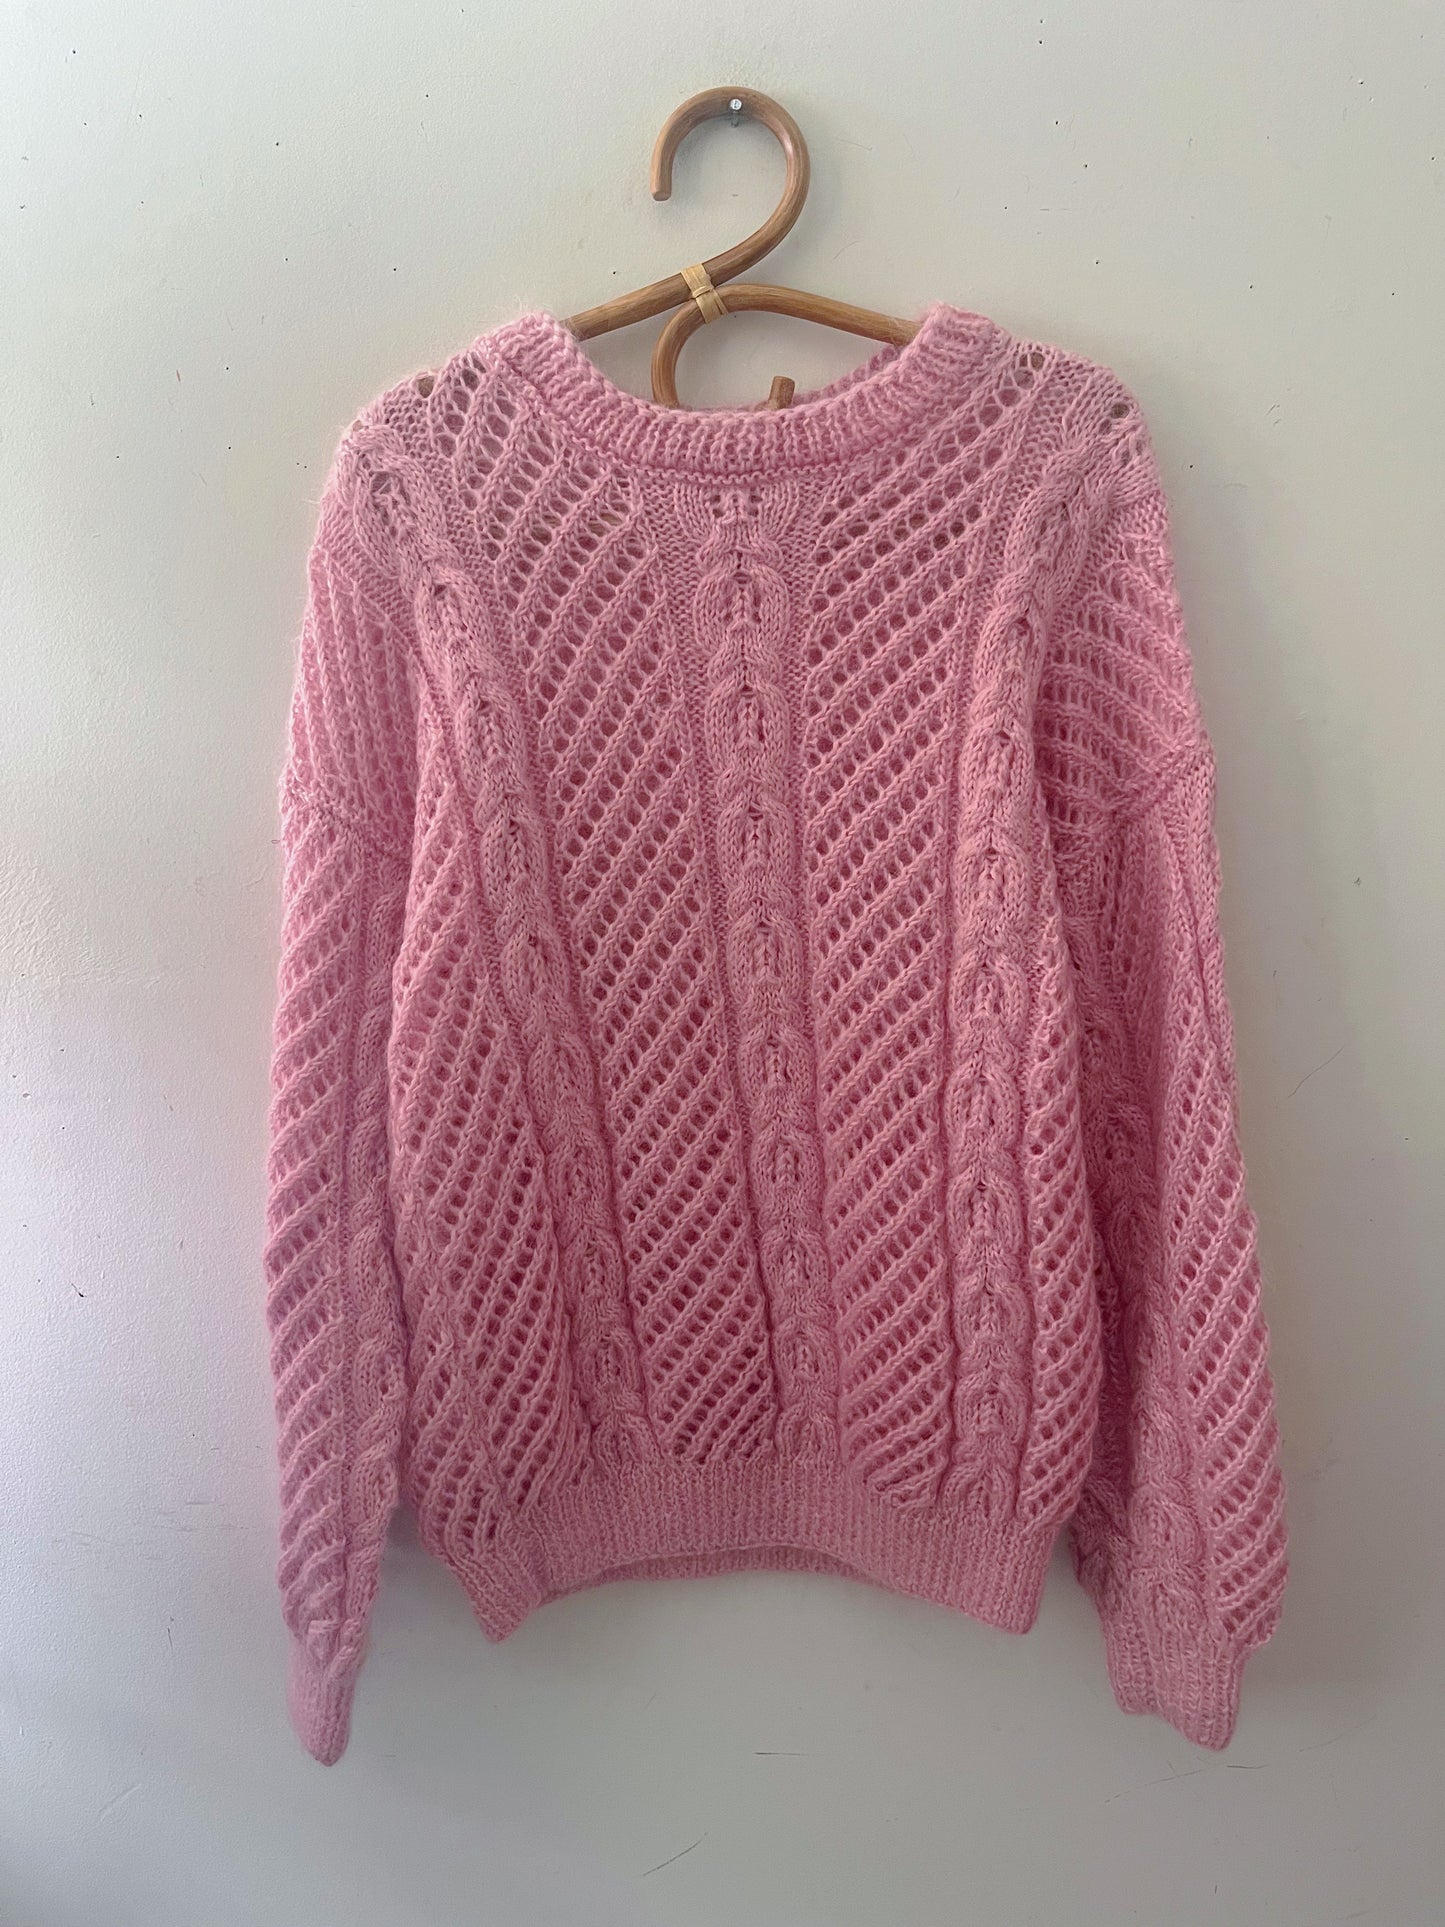 Cotton Candy Laced Knit Cable Sweater